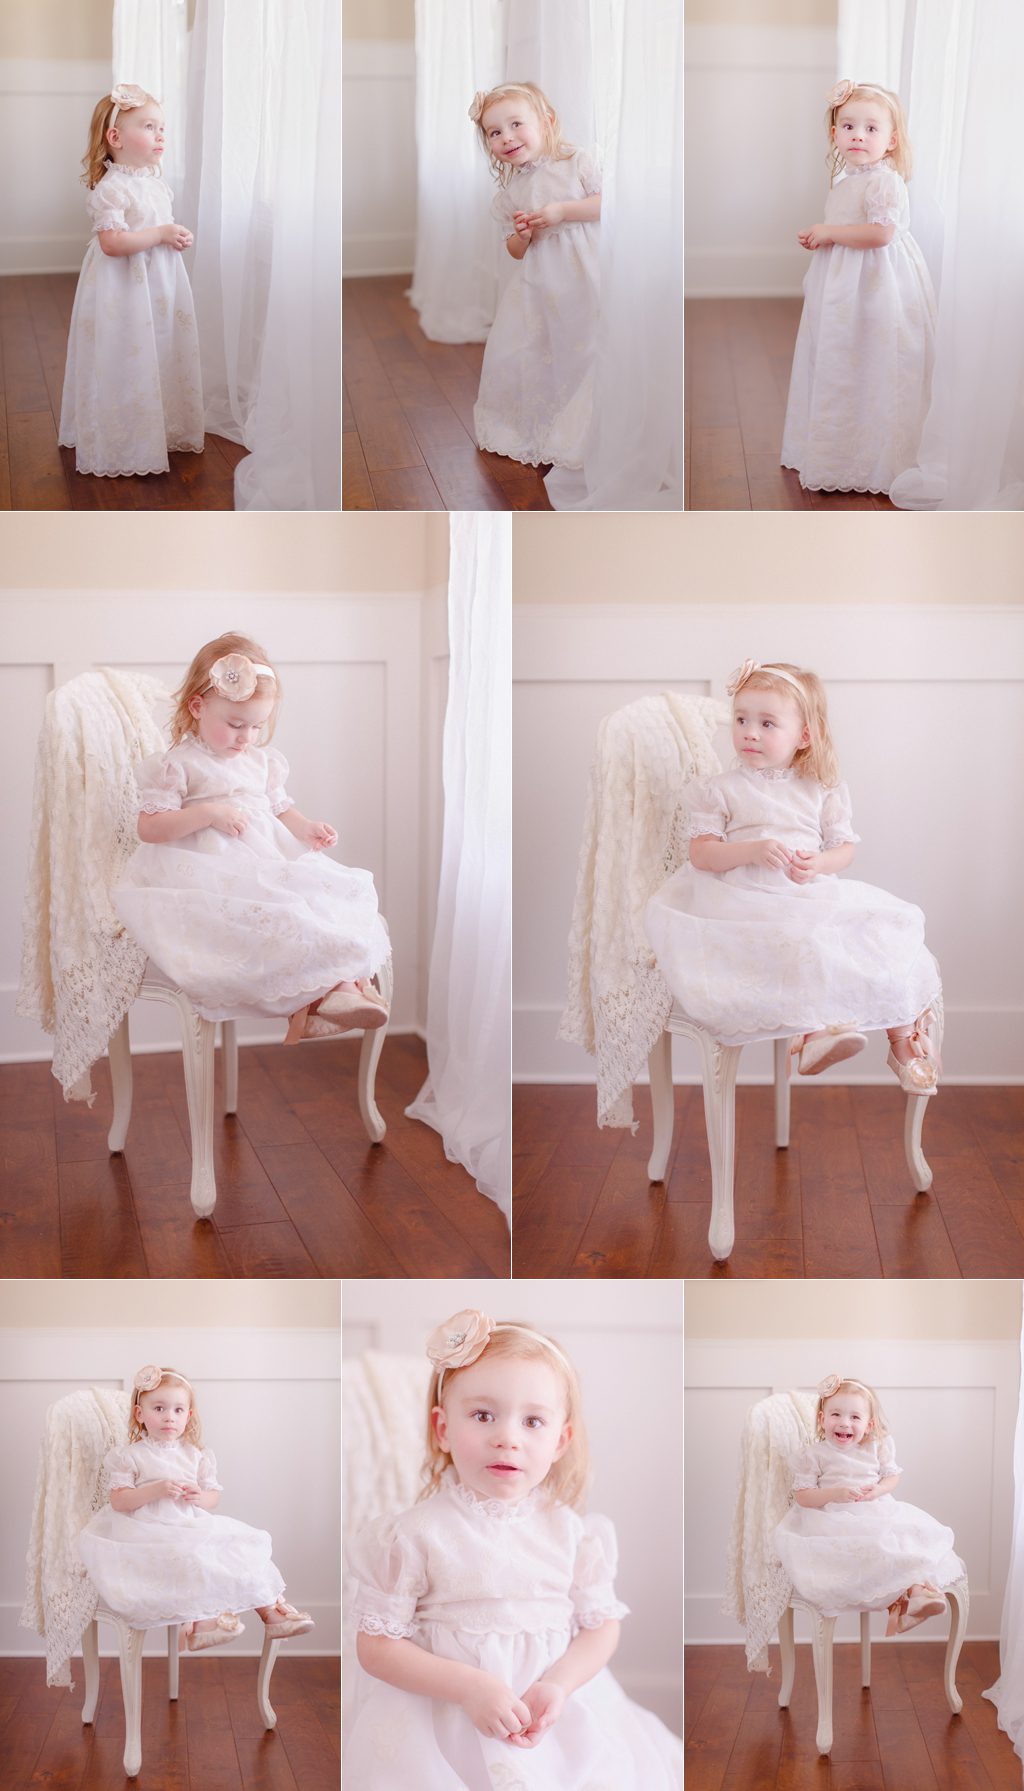 Baptism portraits of a two year old little girl in Oconee County, GA studio.